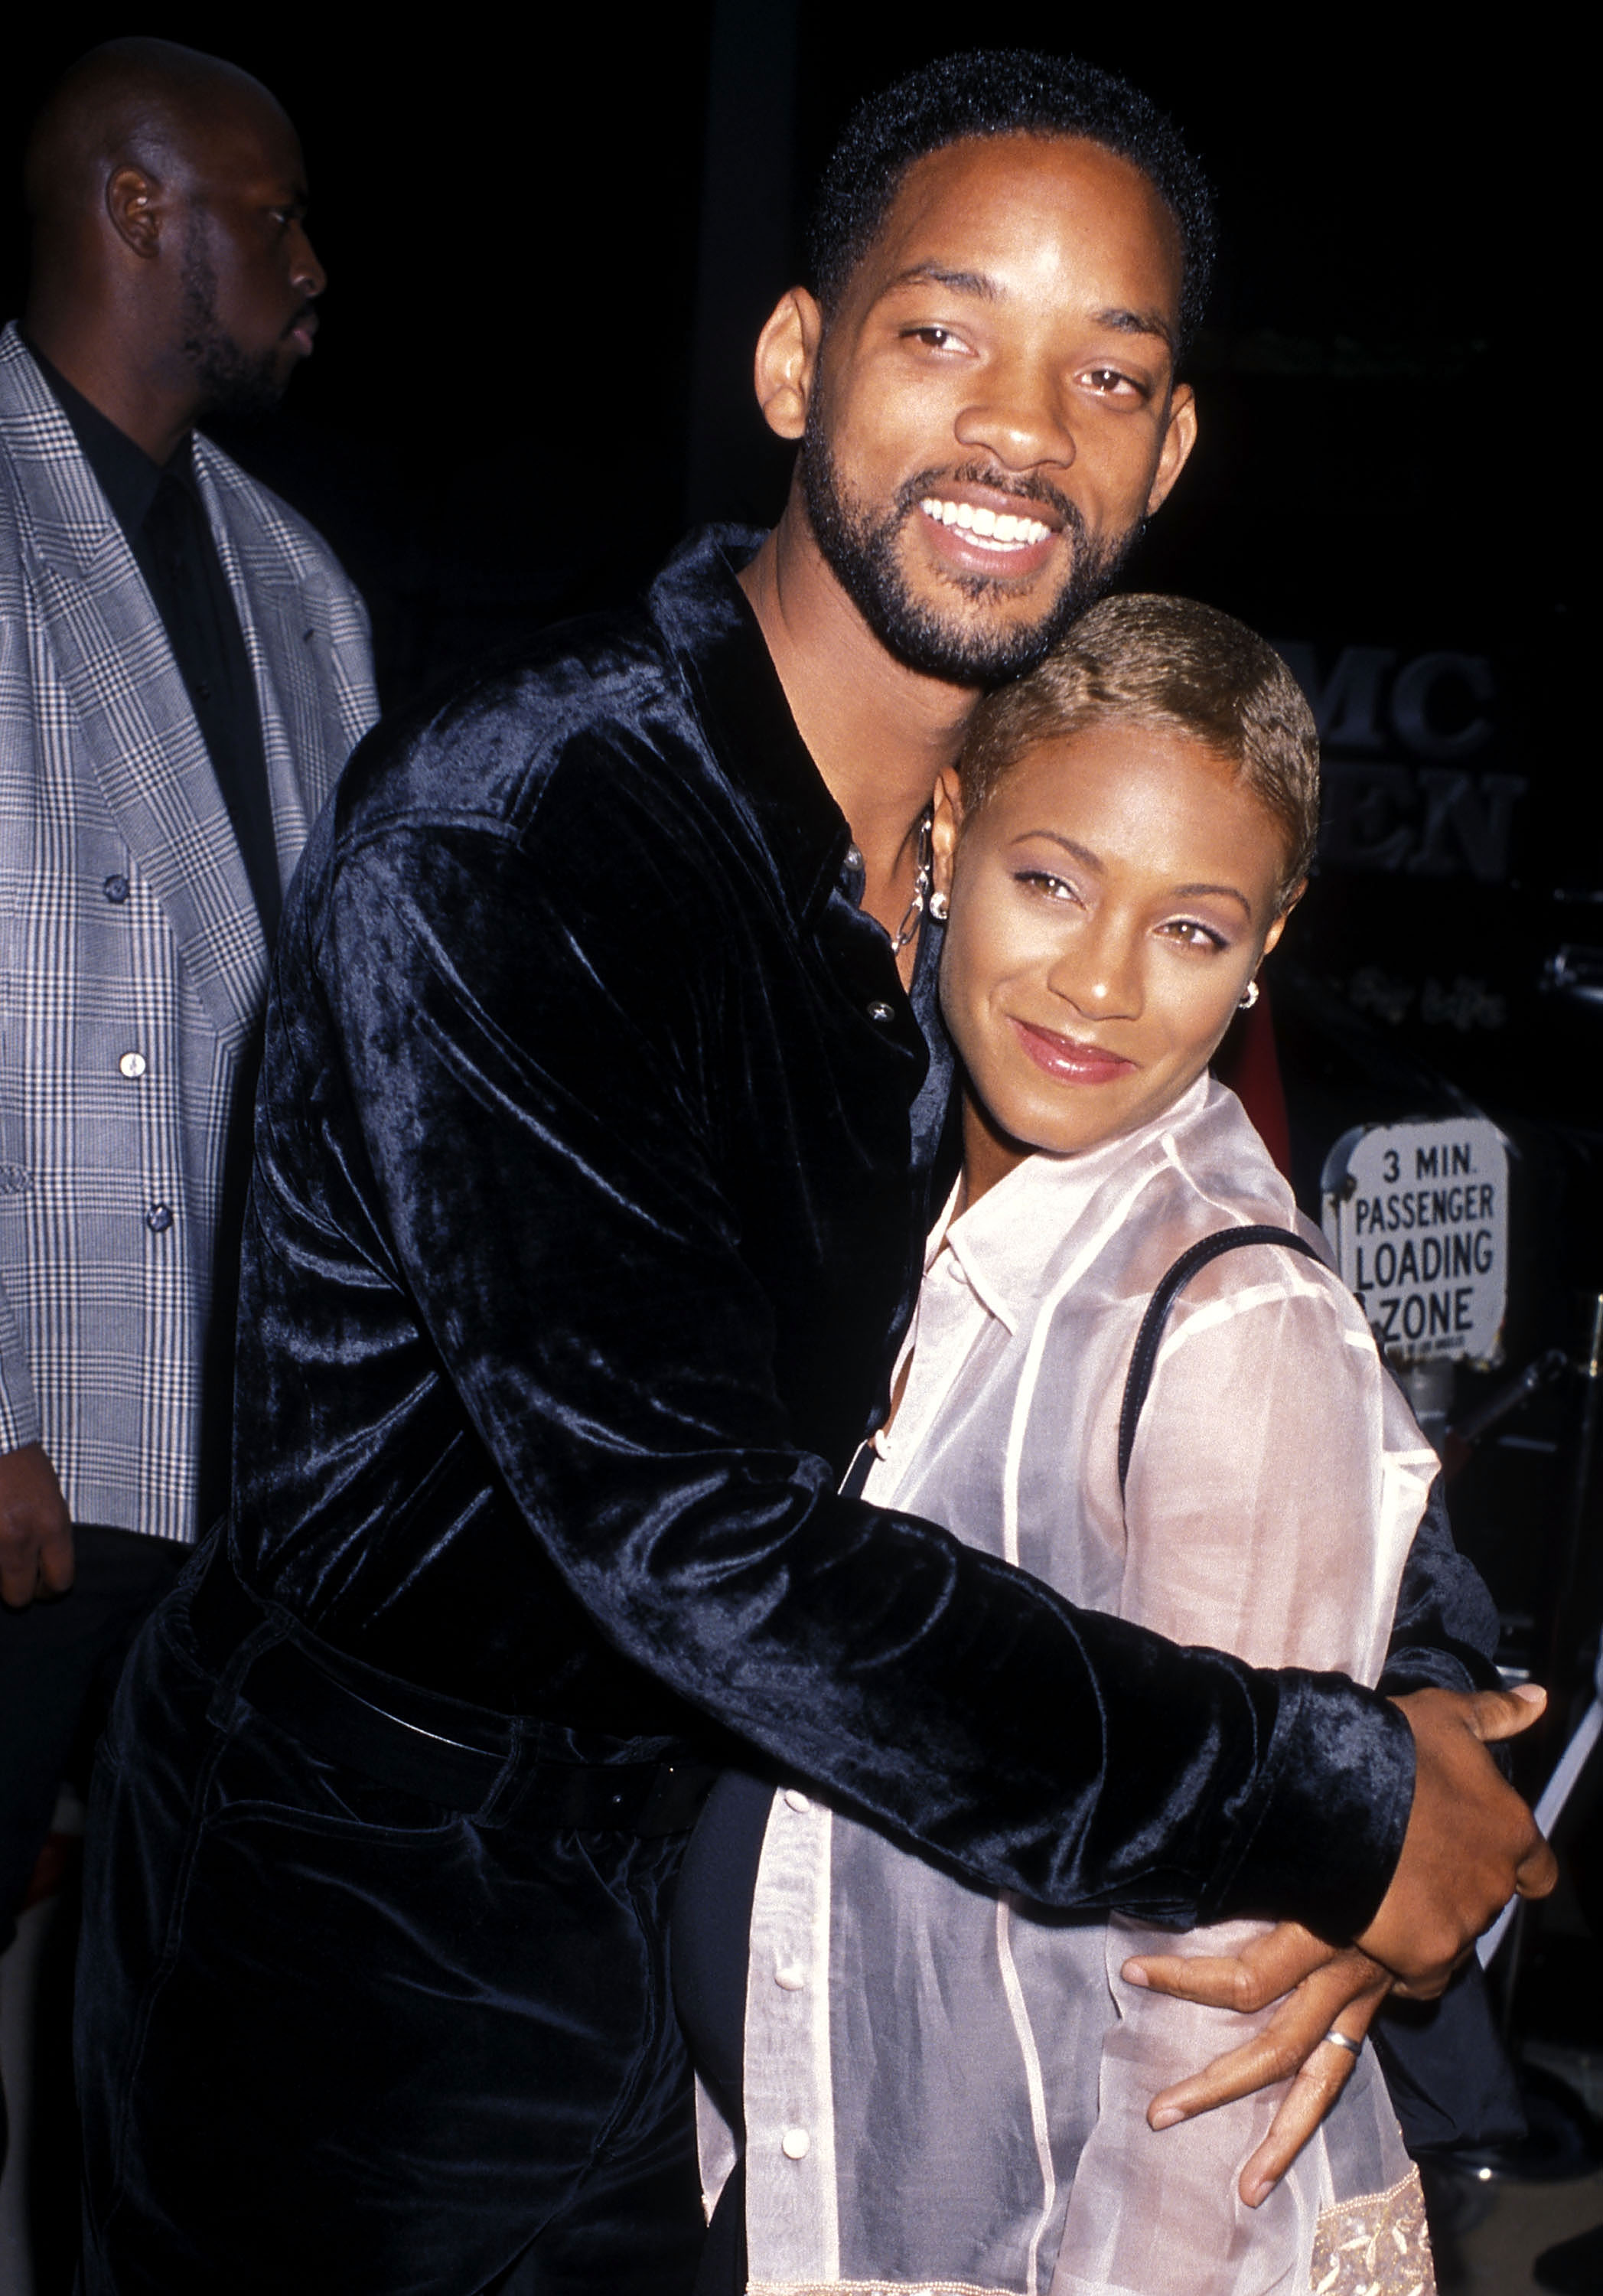 Will Smith and Jada Pinkett Smith attend the "Woo" premiere on May 5, 1998 in Hollywood, California | Source: Getty Images